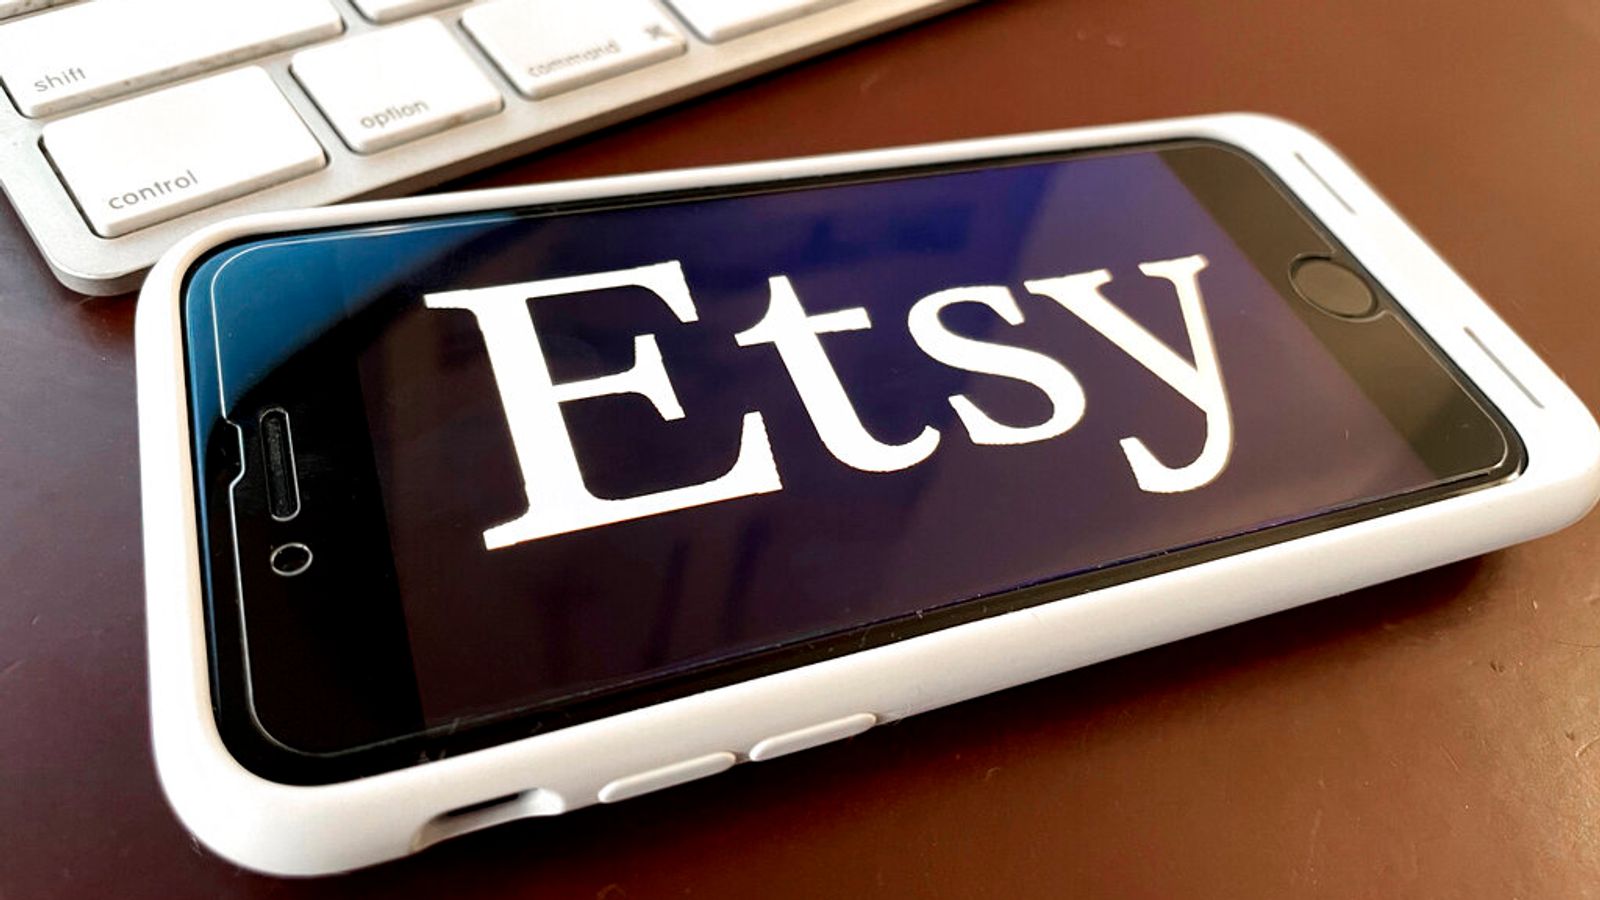 'I can't afford food': Etsy sellers' income wiped out as it holds thousands in sales reserves